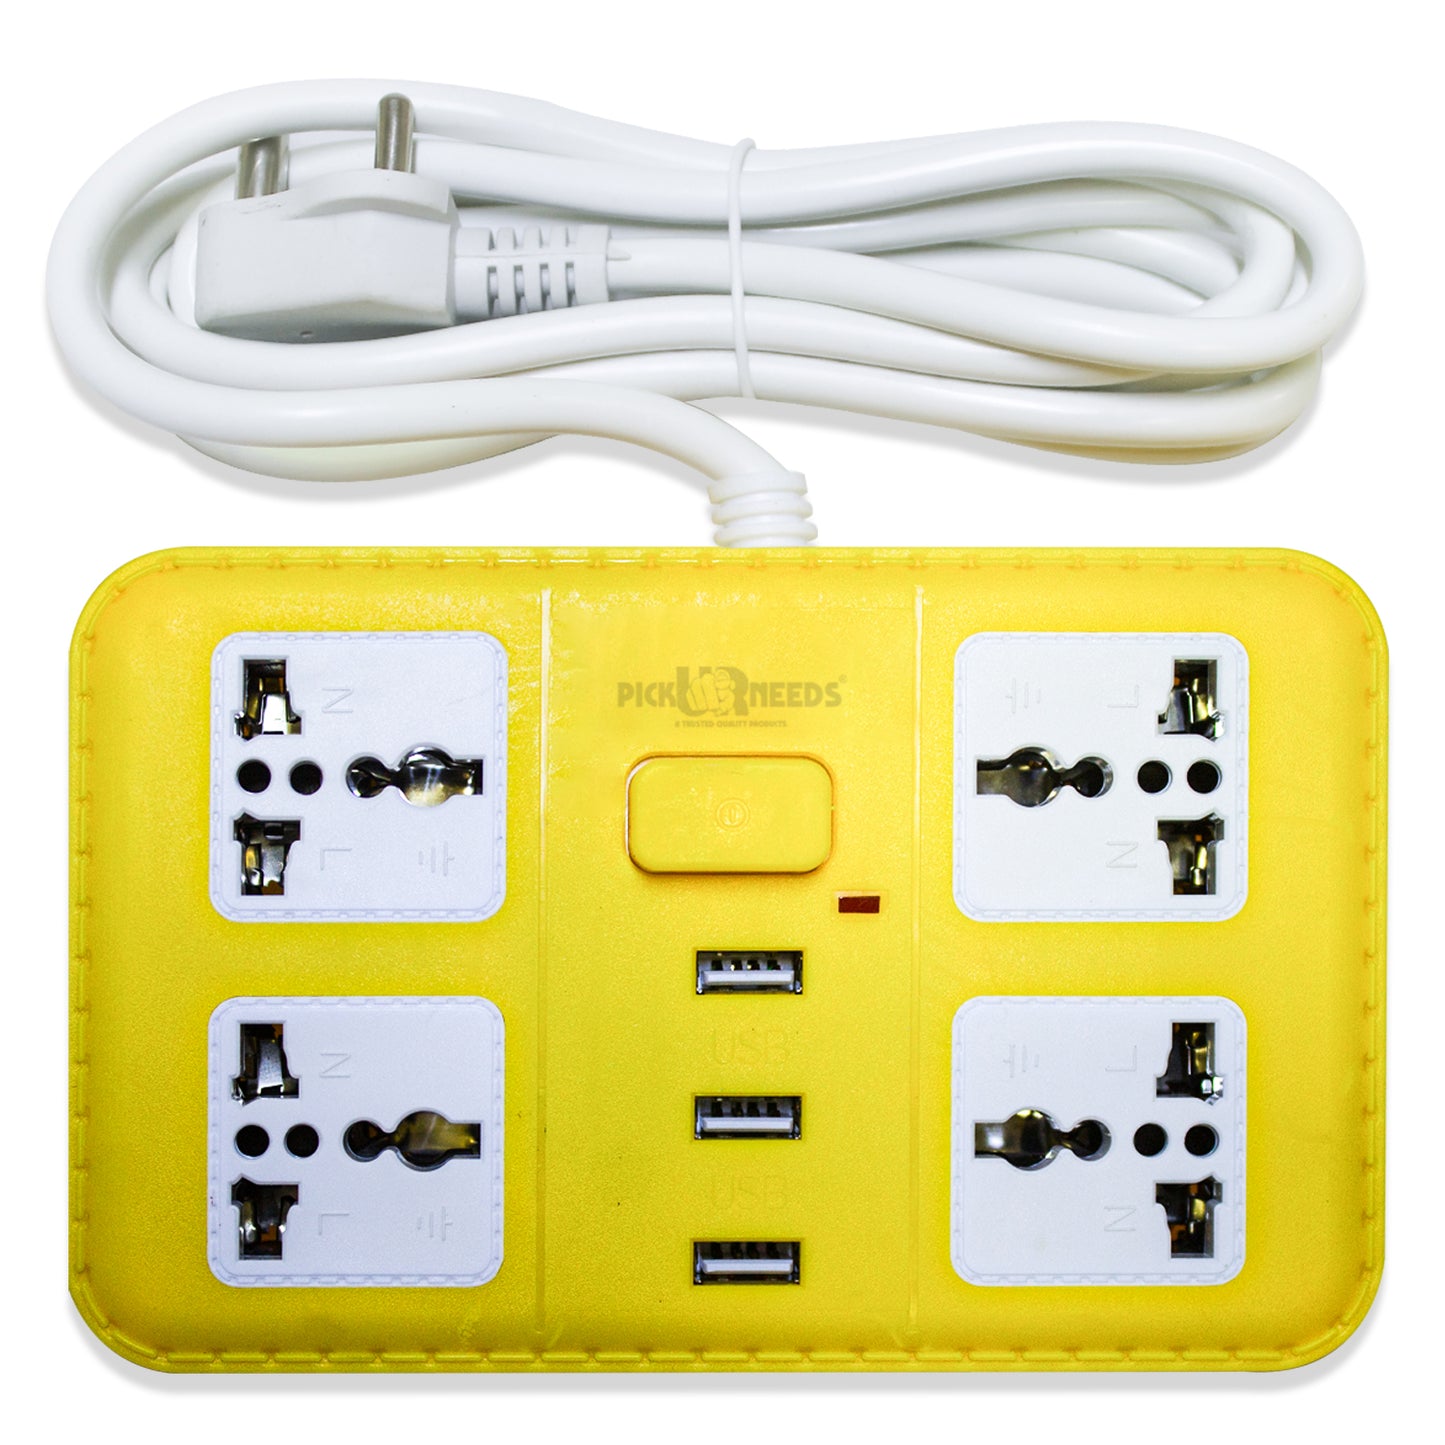 Pick Ur Needs Extension Cord Board with 3 USB Charging Ports and 4 Socket -10 Amp Heavy Duty for Multiple Devices Smartphone Tablet Laptop